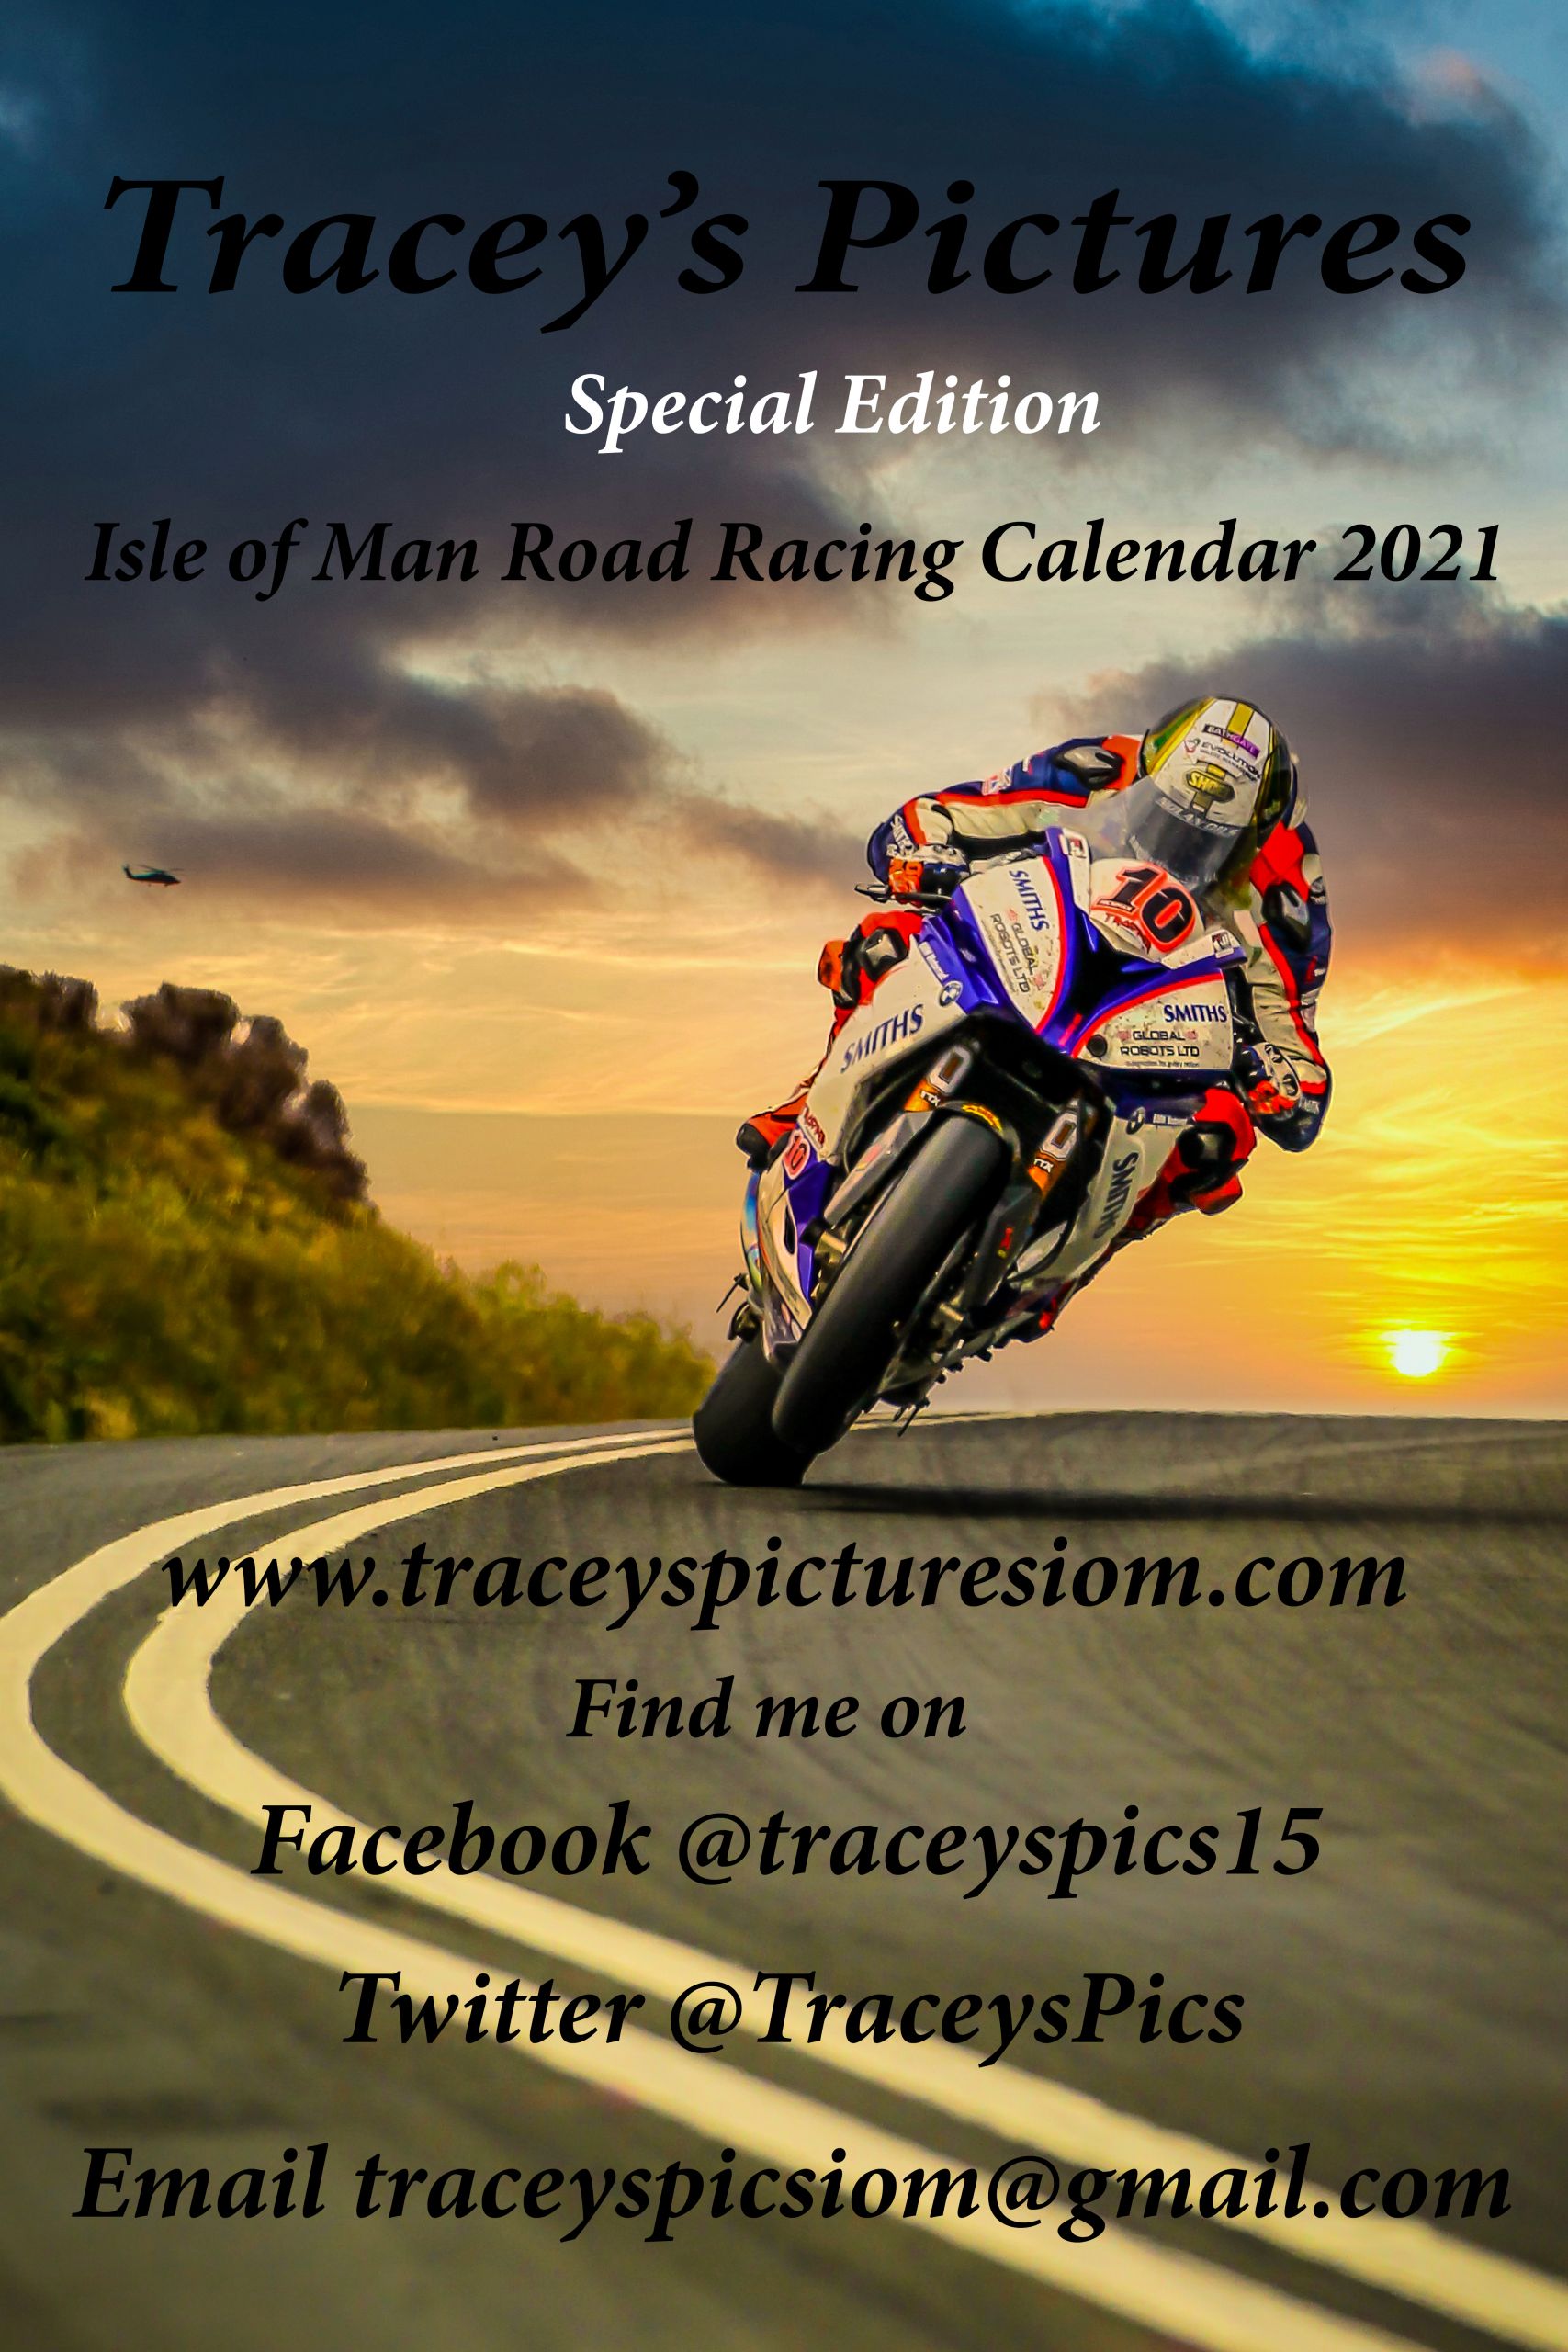 IOM ROAD RACING CALENDAR 2021 Special Edition Traceys Pictures